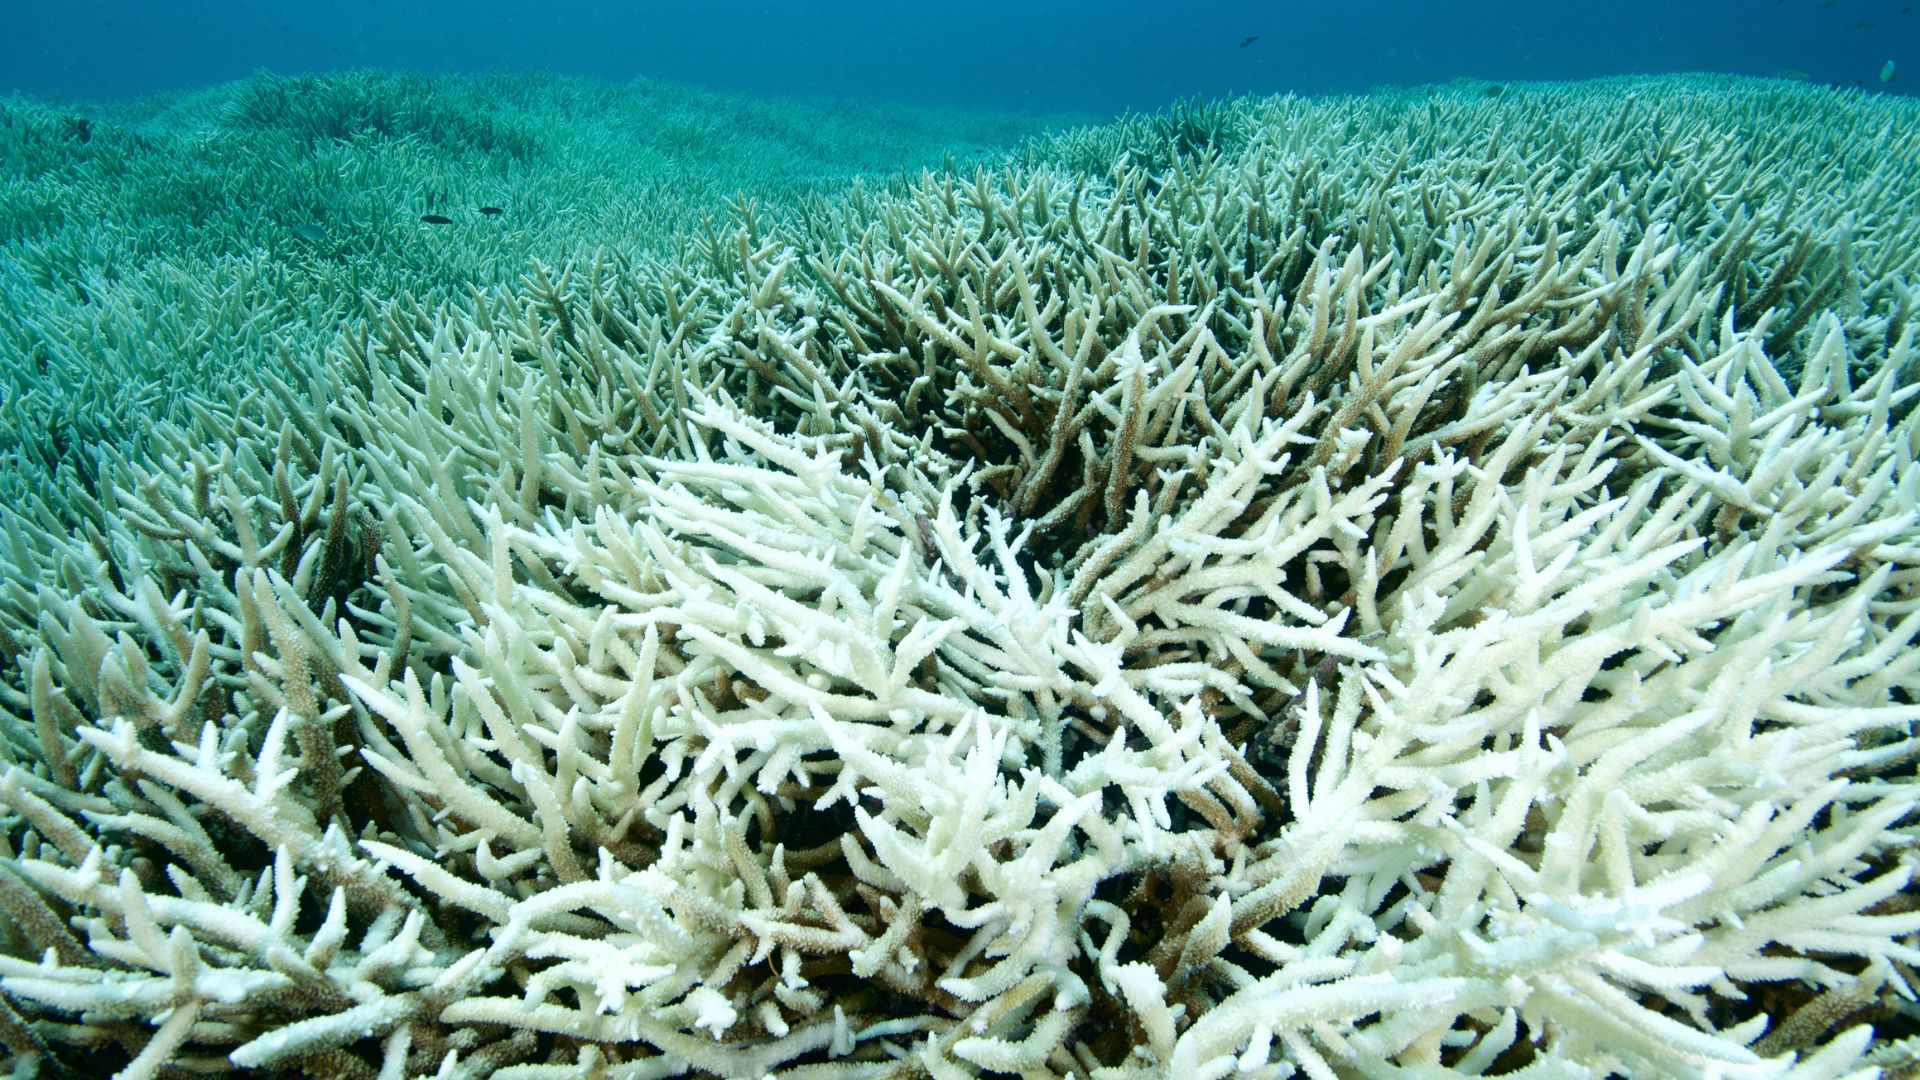 Wildfire underwater is killing the Great Barrier Reef [Video]